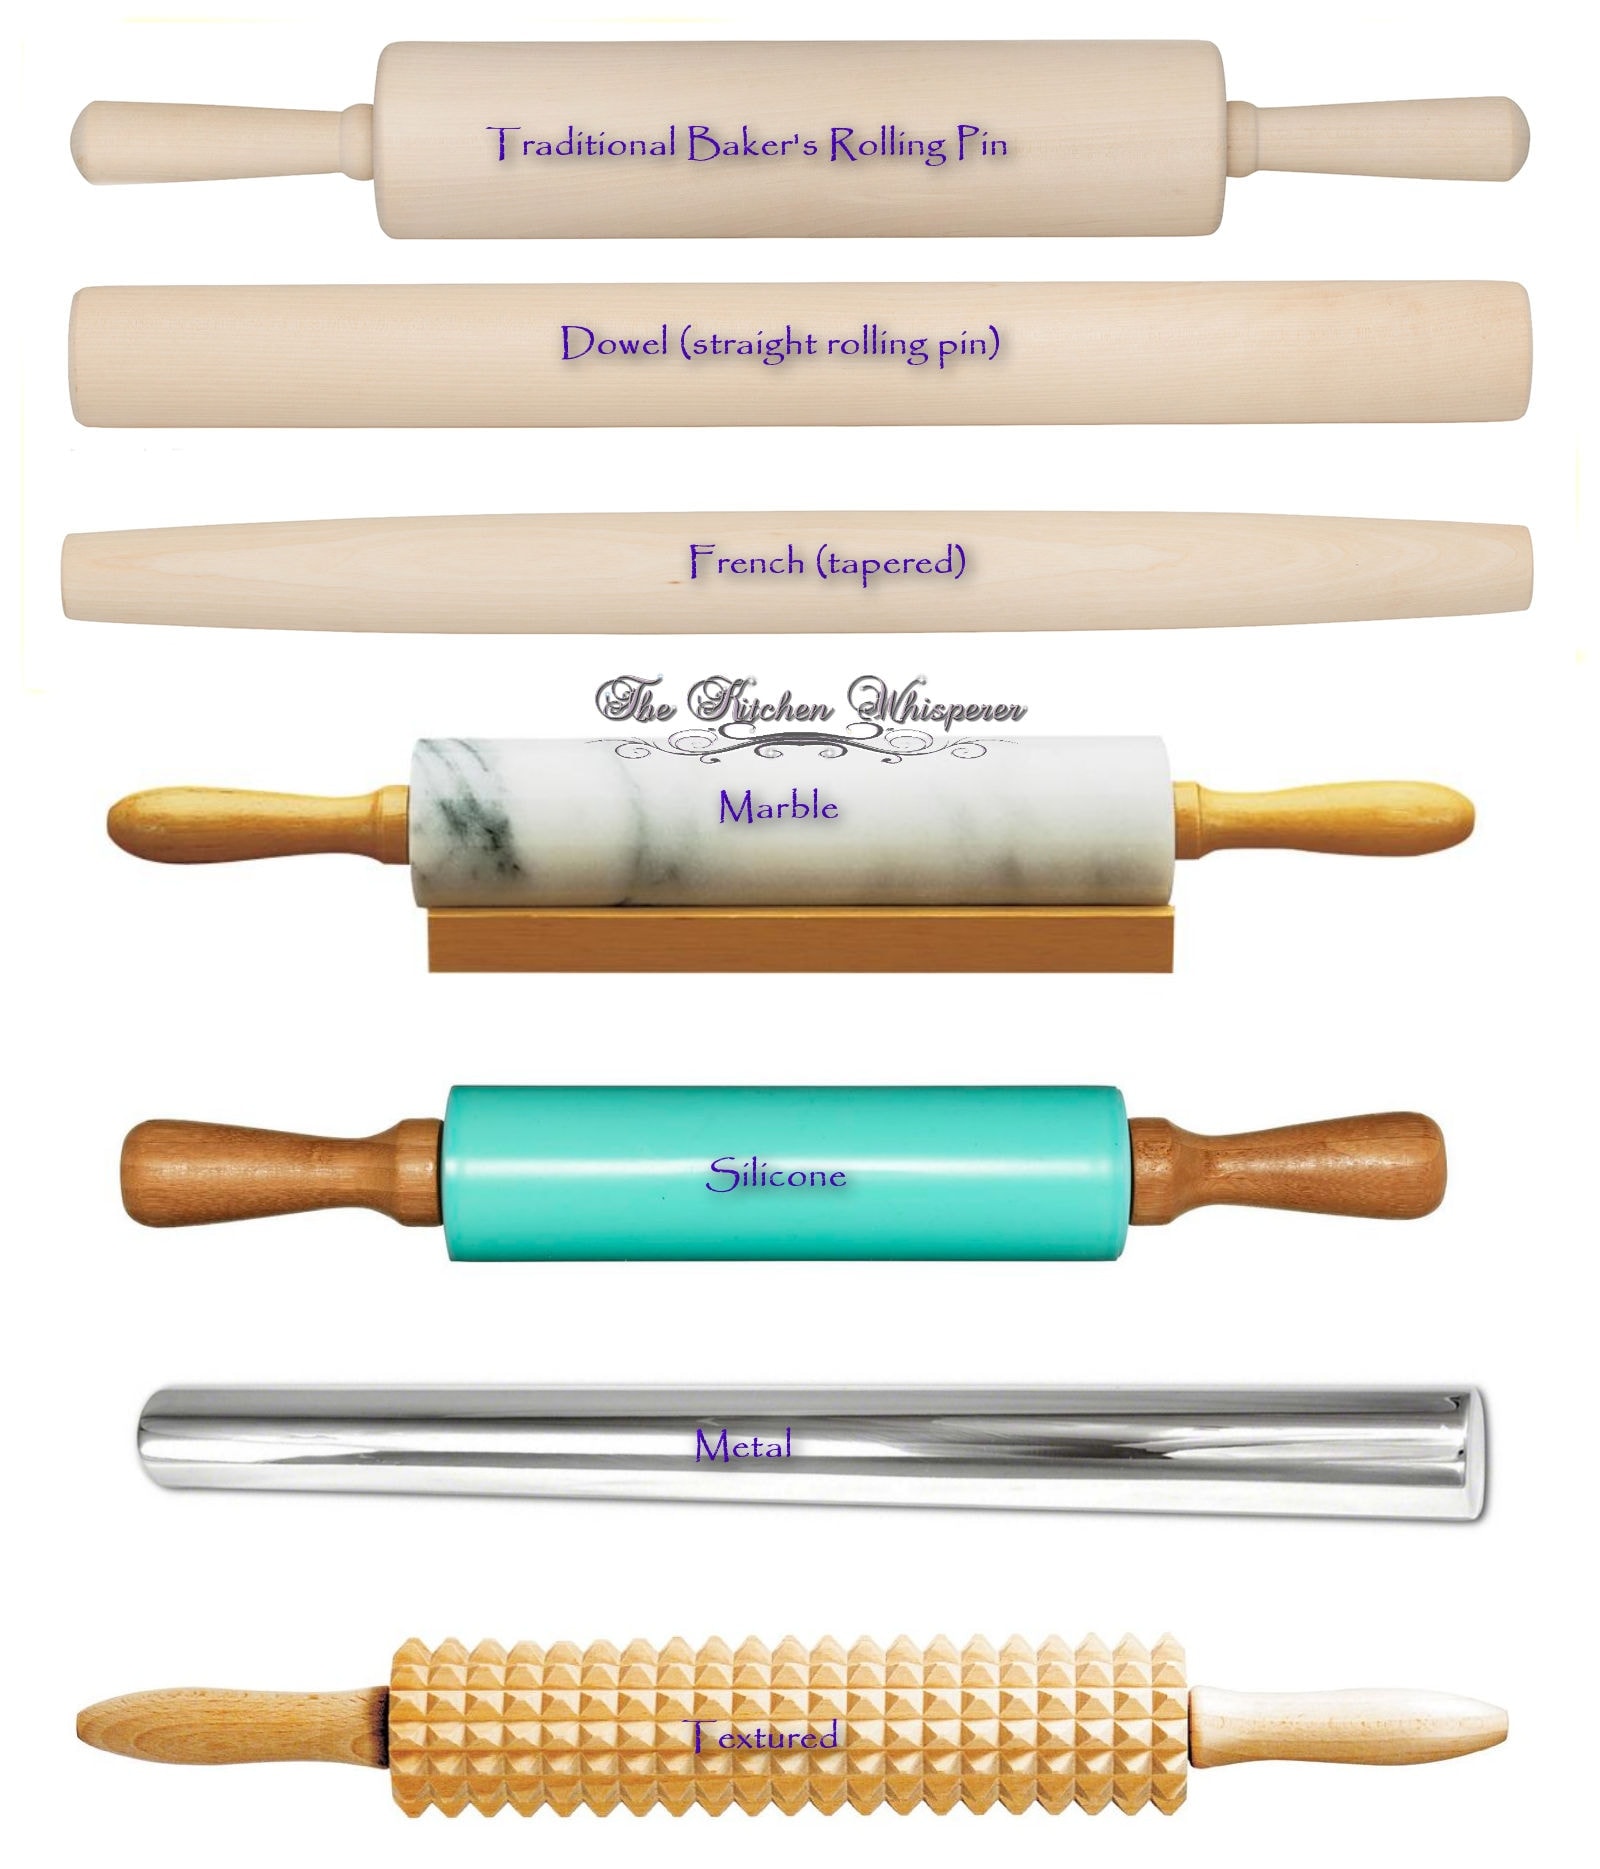 Tuesday's Tip with The Kitchen Whisperer – All About Rolling Pins